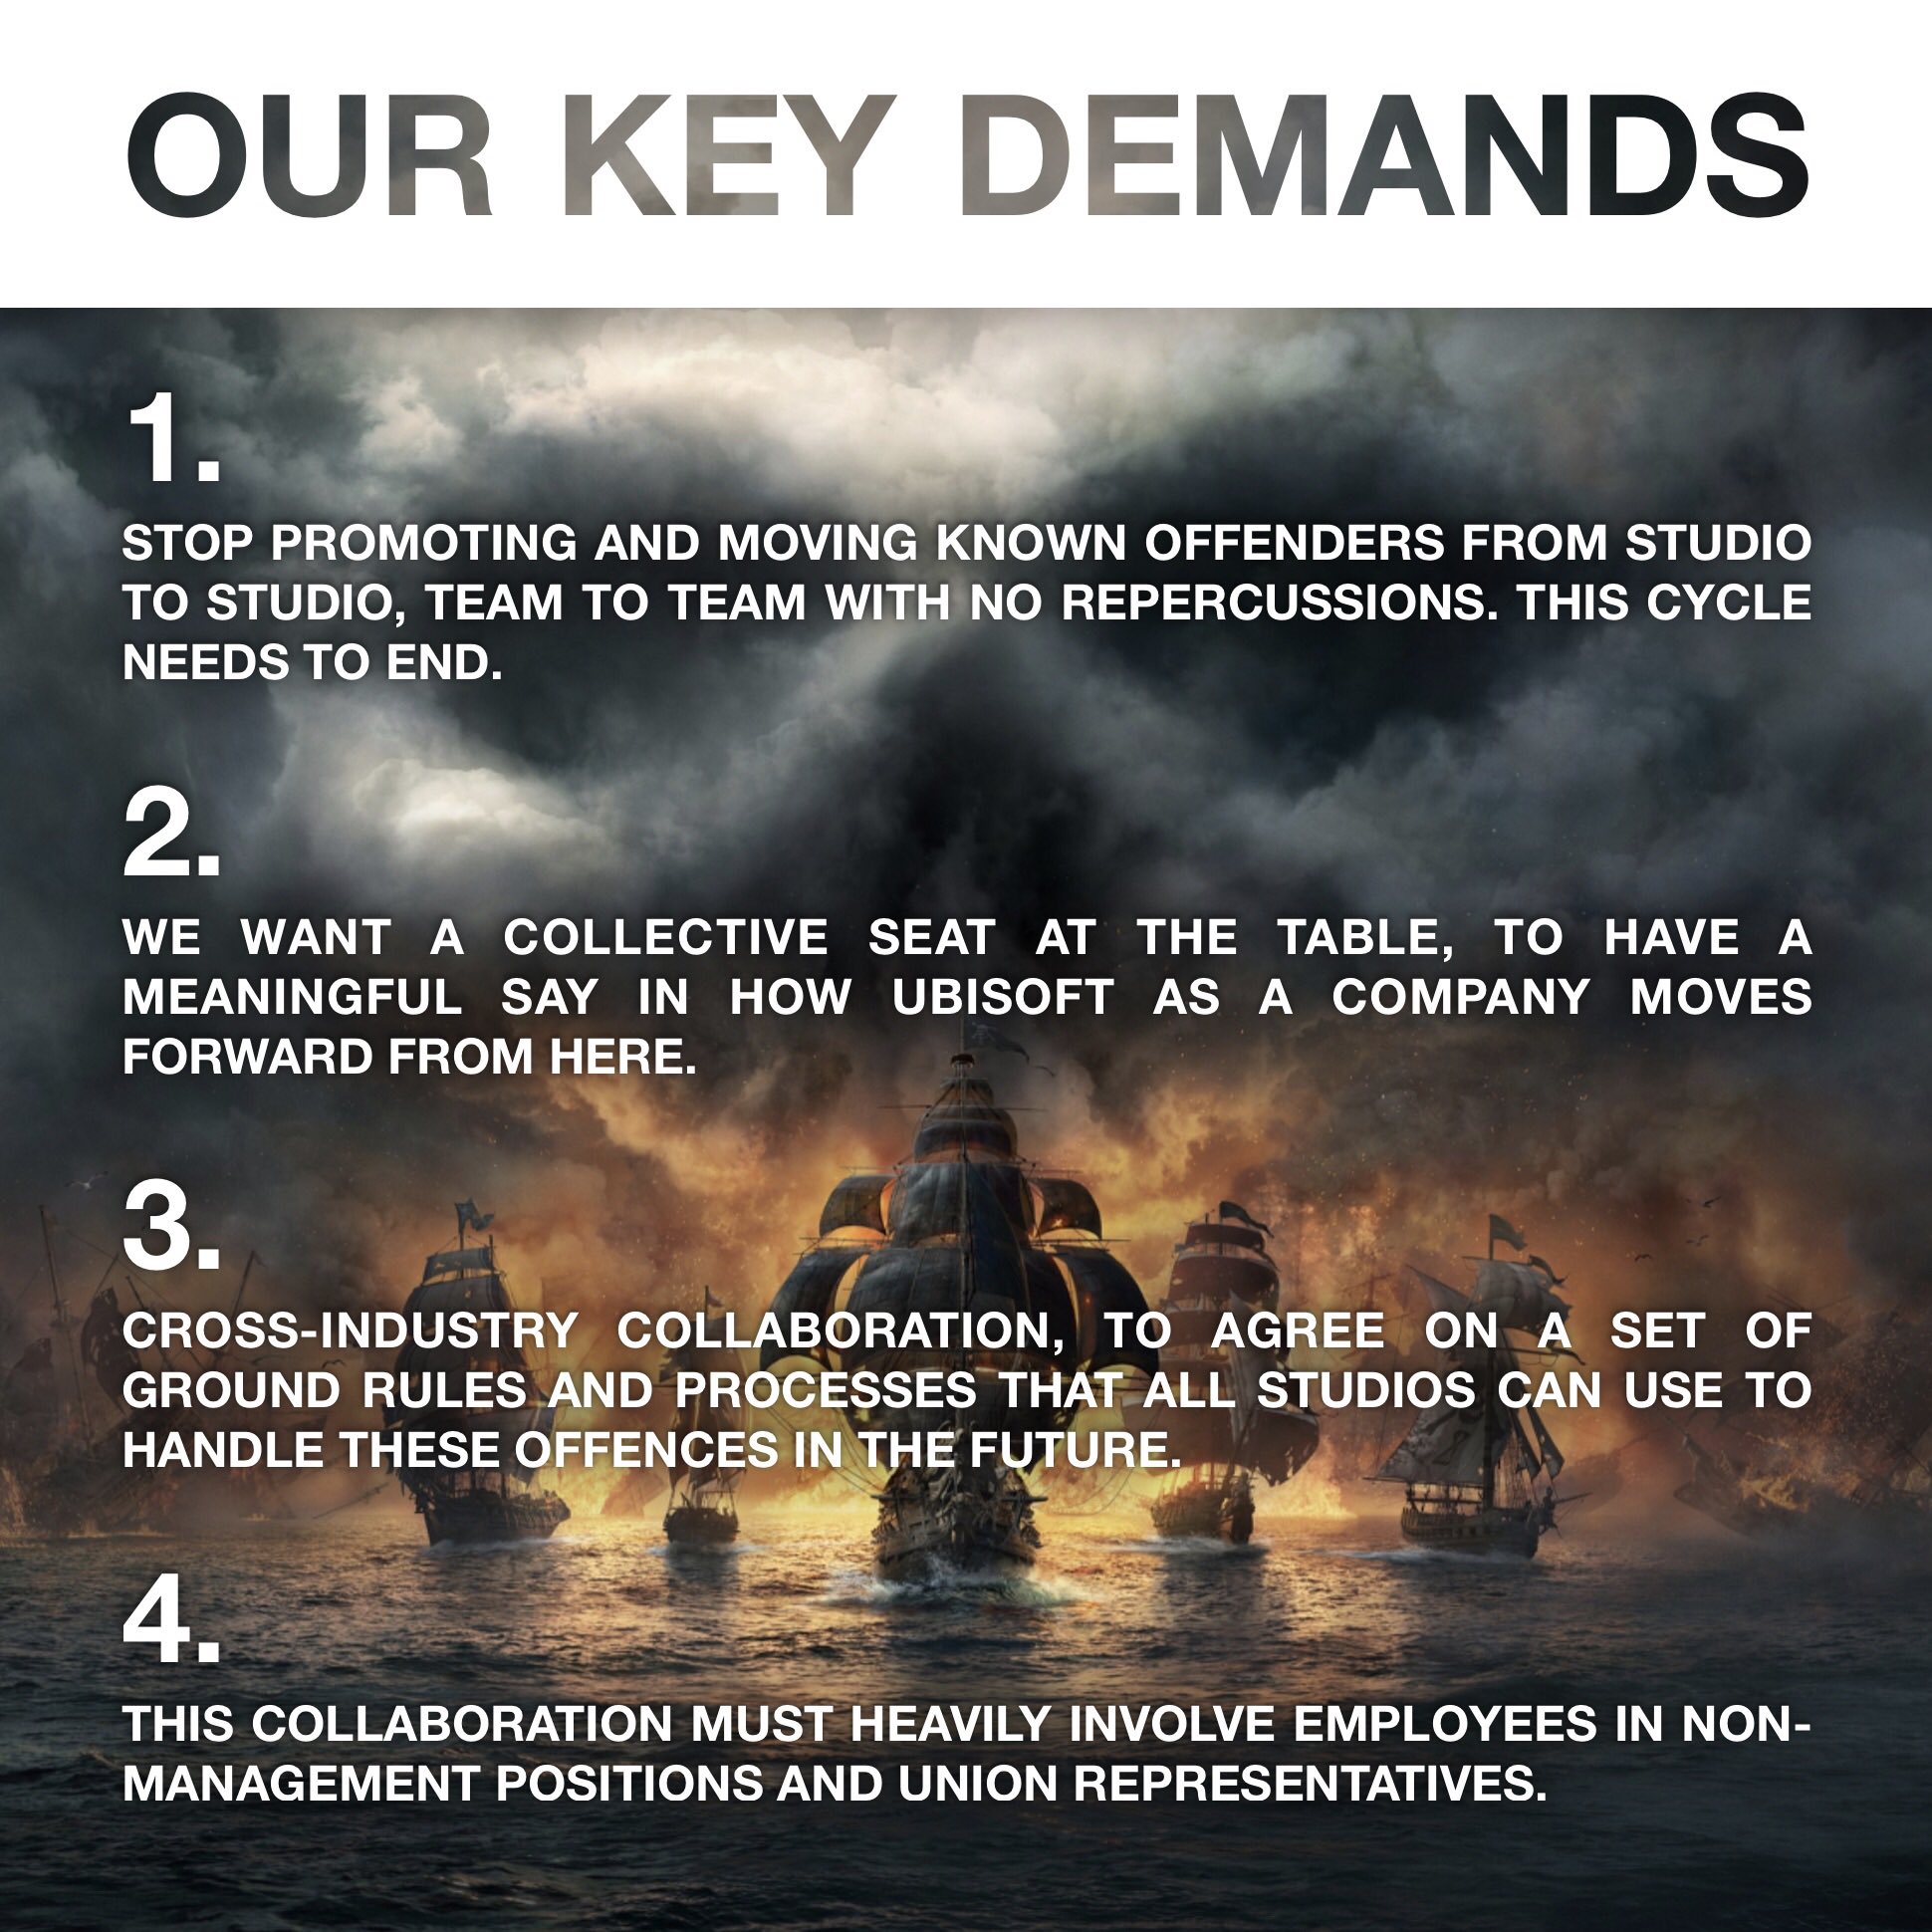 OUR KEY DEMANDS 1. Stop promoting and moving known offenders from studio to studio, team to team with no repercussions. This cycle needs to end. 2. We want a collective seat at the table, to have a meaningful say in how Ubisoft as a company moves forward from here. 3. Cross-industry collaboration, to agree on a set of ground rules and processes that all studios can use to handle these offences in the future. 4. This collaboration must heavily involve employees in non-management positions and union representatives.